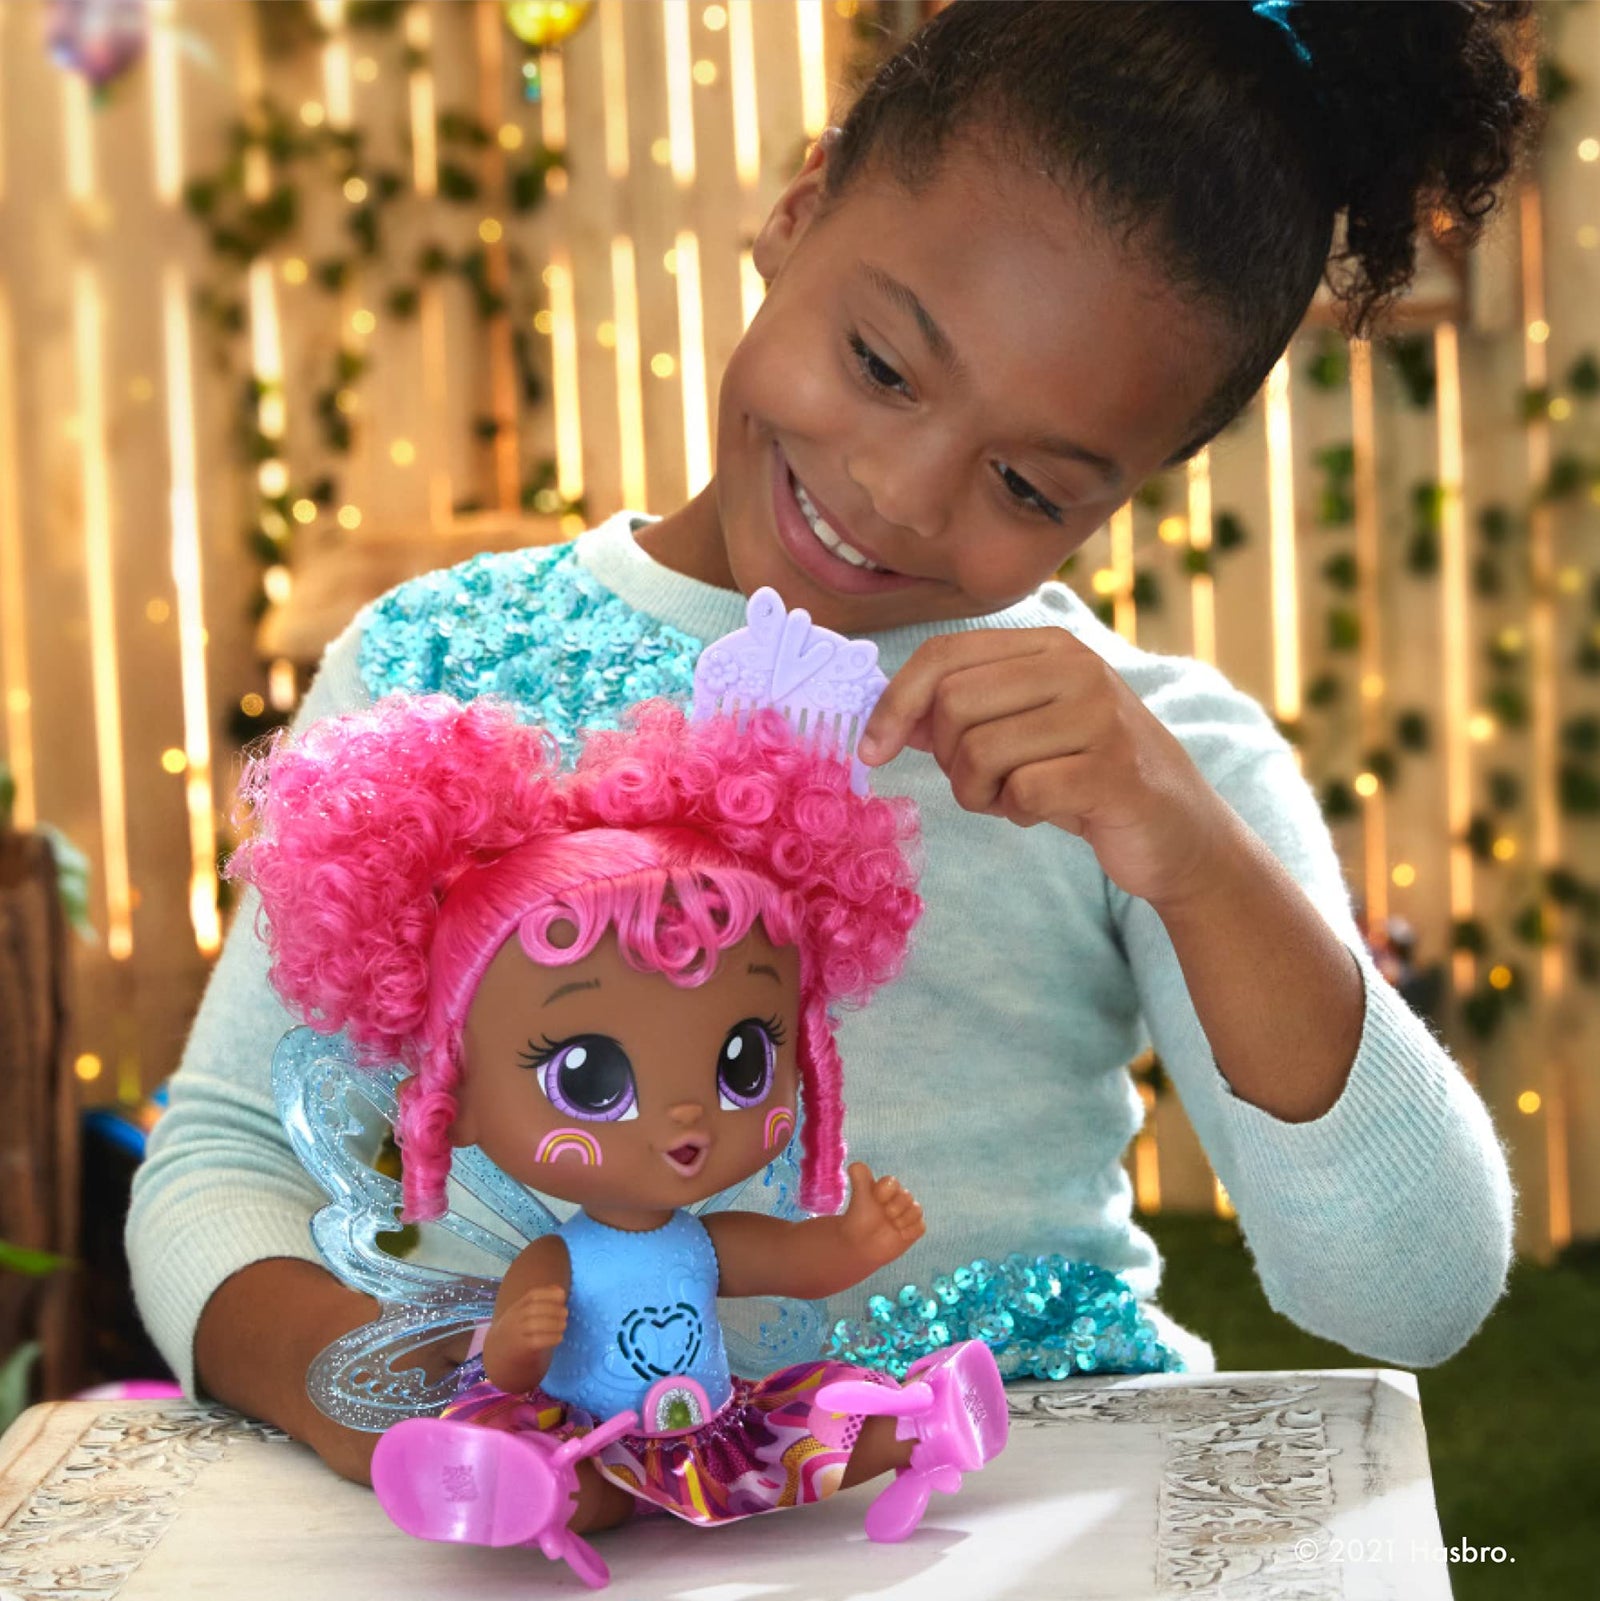 Baby Alive GloPixies Doll, Gabi Glitter, Glowing Pixie Doll Toy for Kids Ages 3 and Up, Interactive 10.5-inch Doll Glows with Pretend Feeding (Amazon Exclusive)